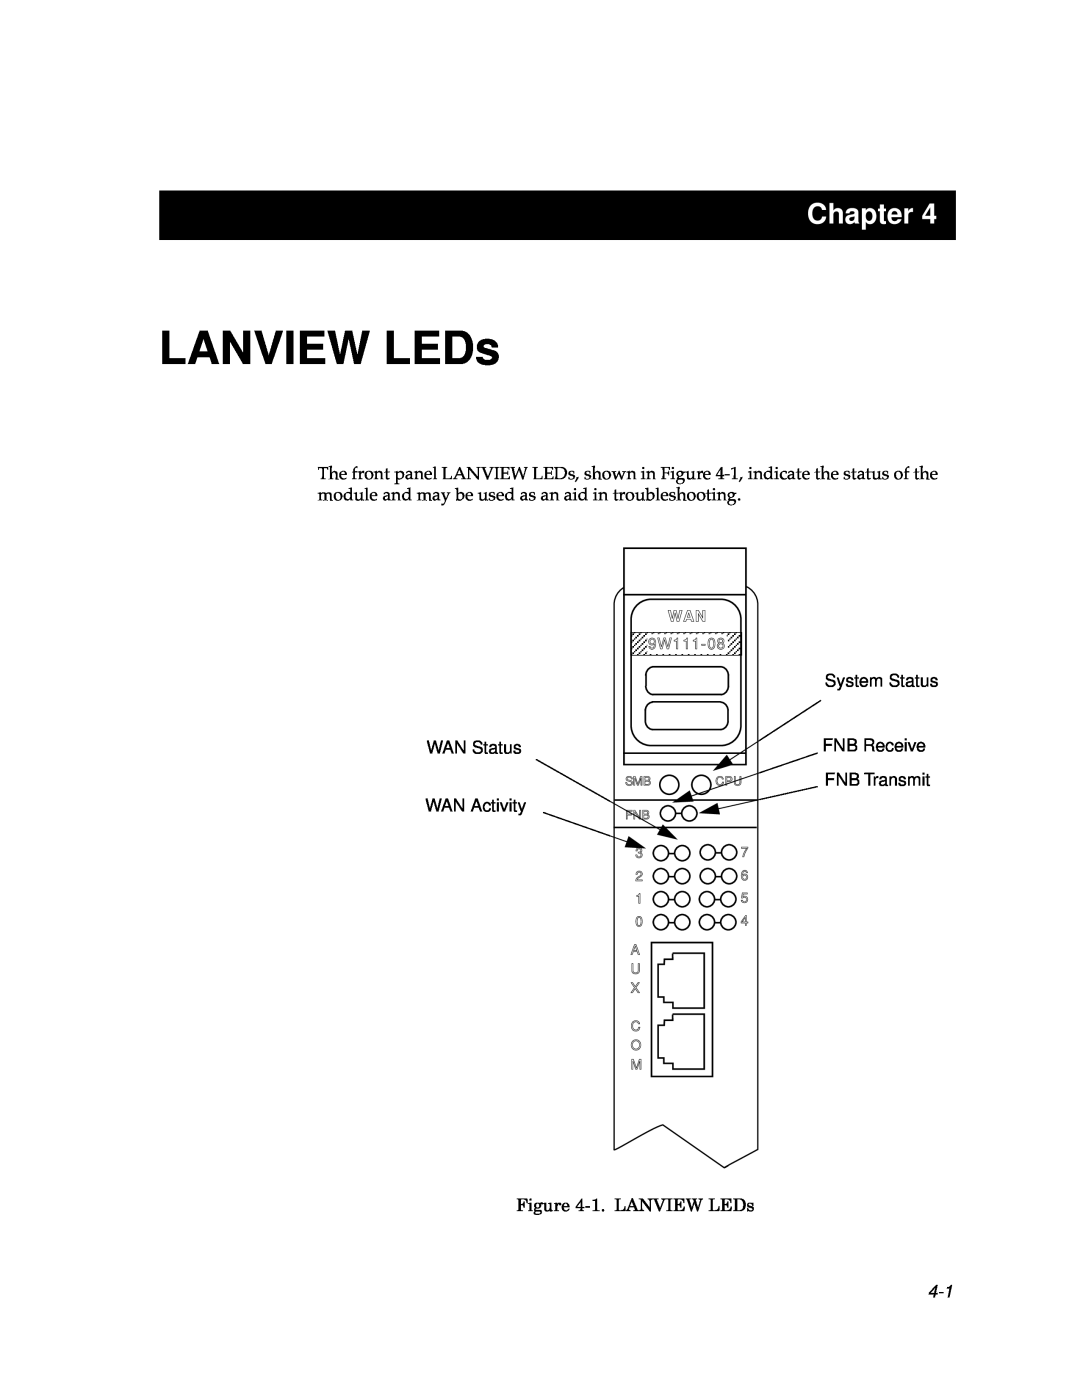 Cabletron Systems 9W111-08 manual LANVIEW LEDs, Chapter, WAN Status WAN Activity, System Status FNB Receive FNB Transmit 